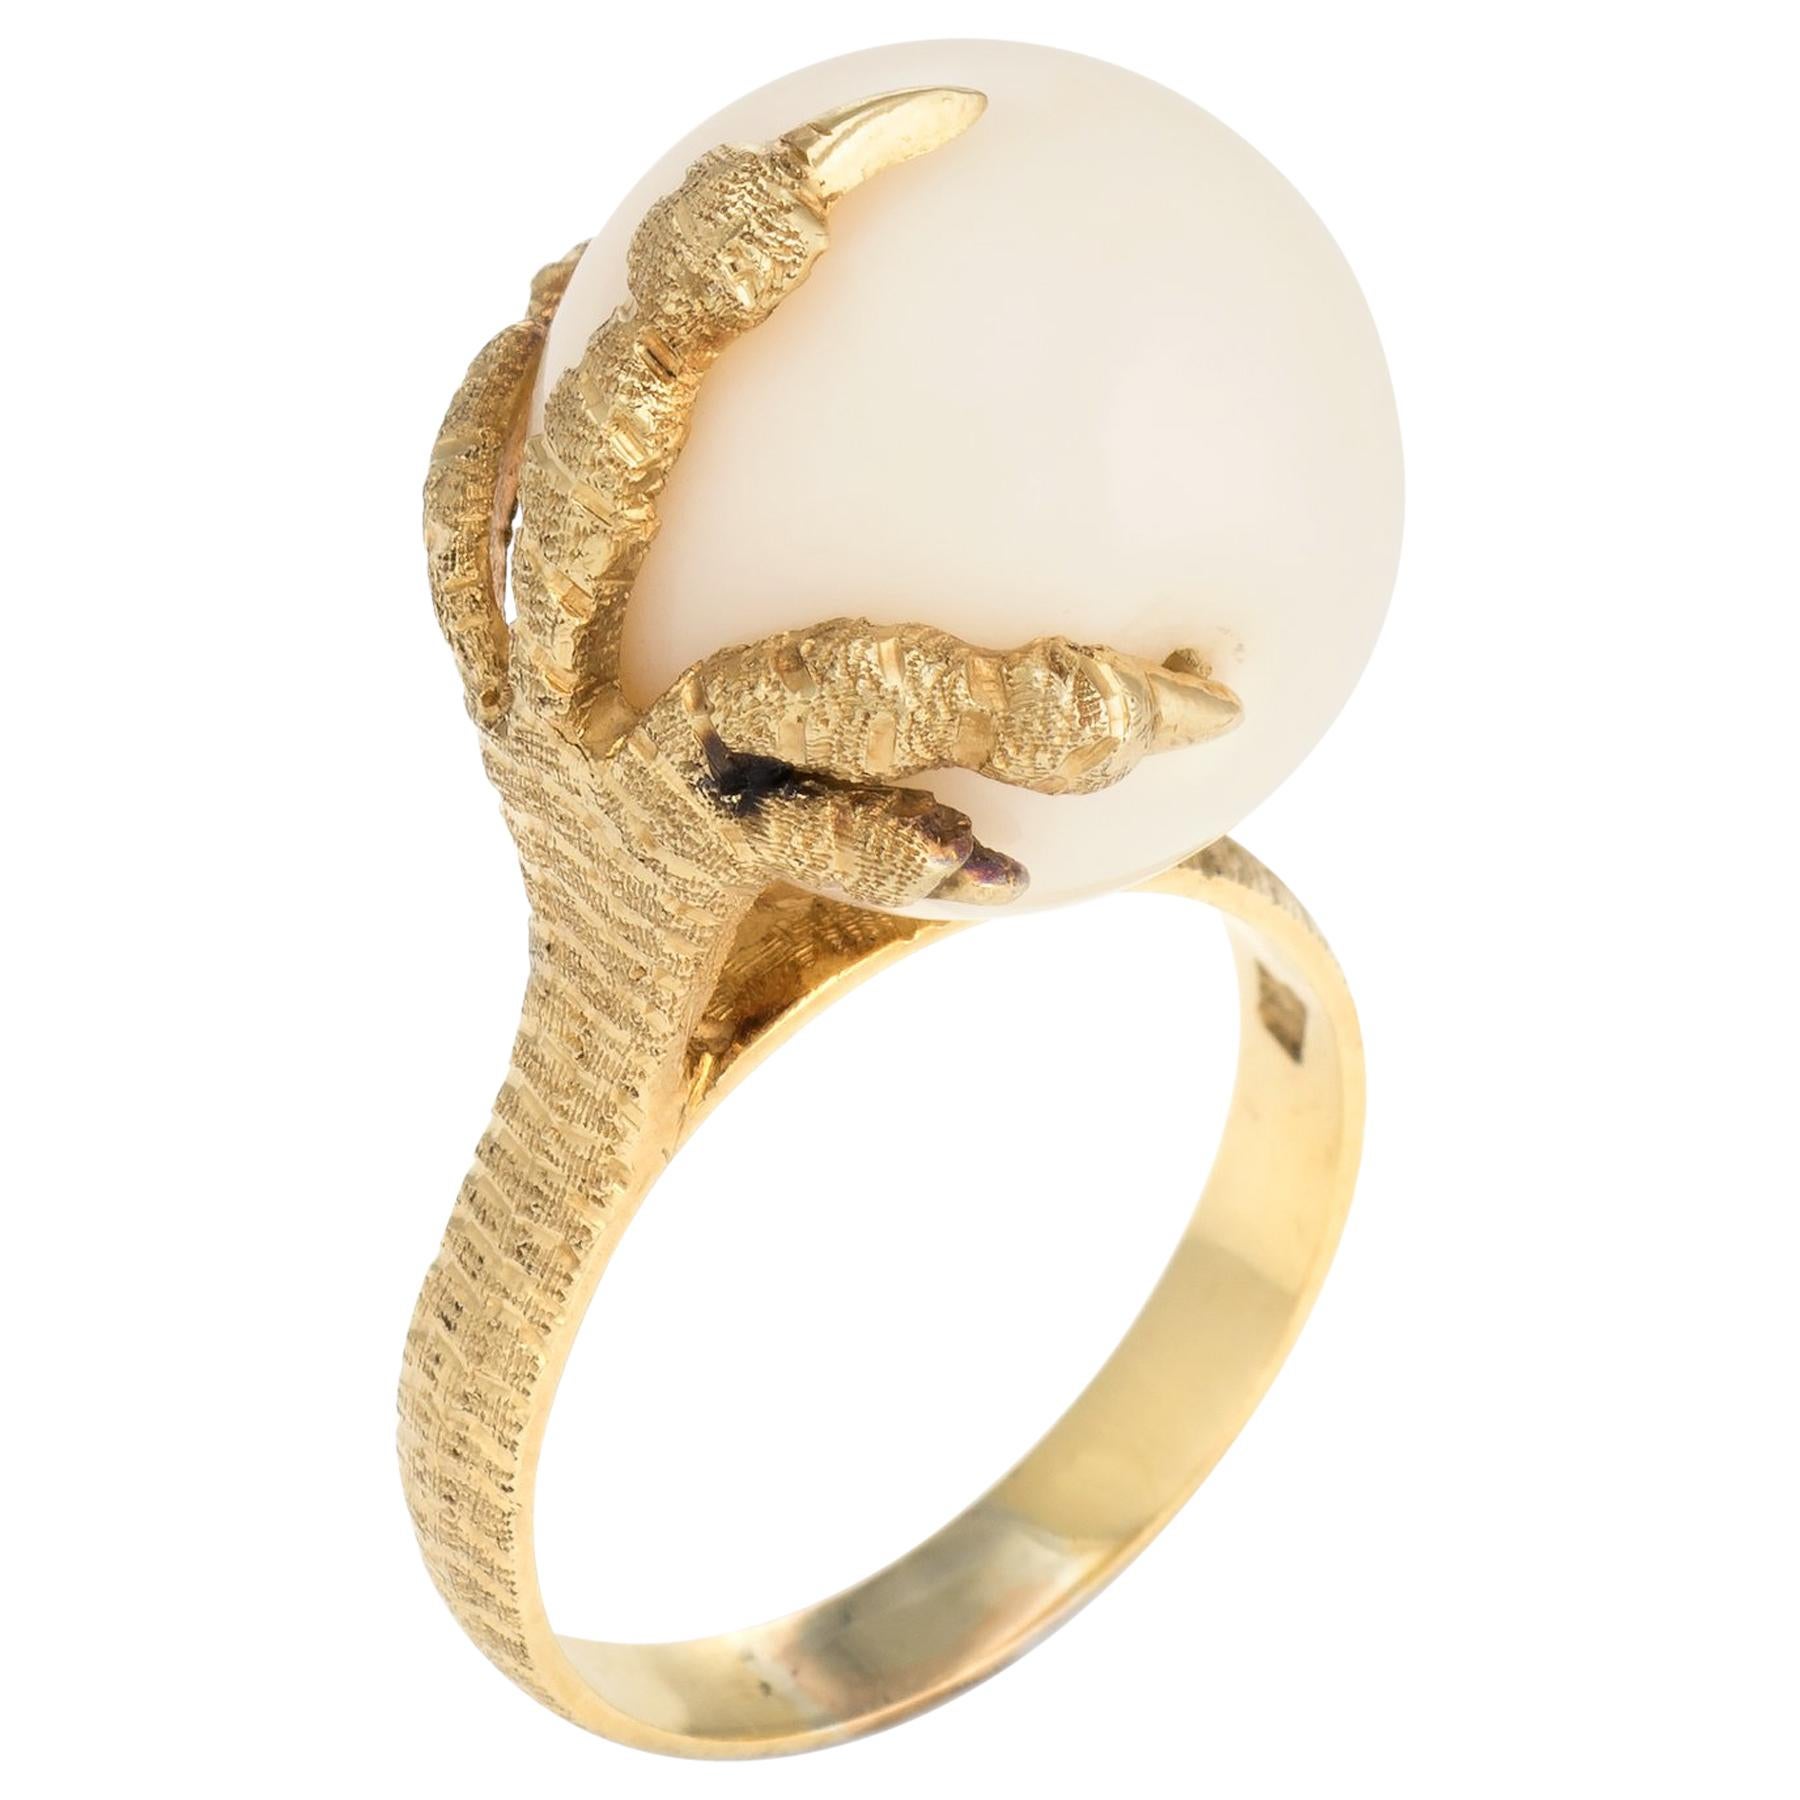 Vintage Dragon Claw Ring 18 Karat Yellow Gold Coral Orb Estate Fine Jewelry